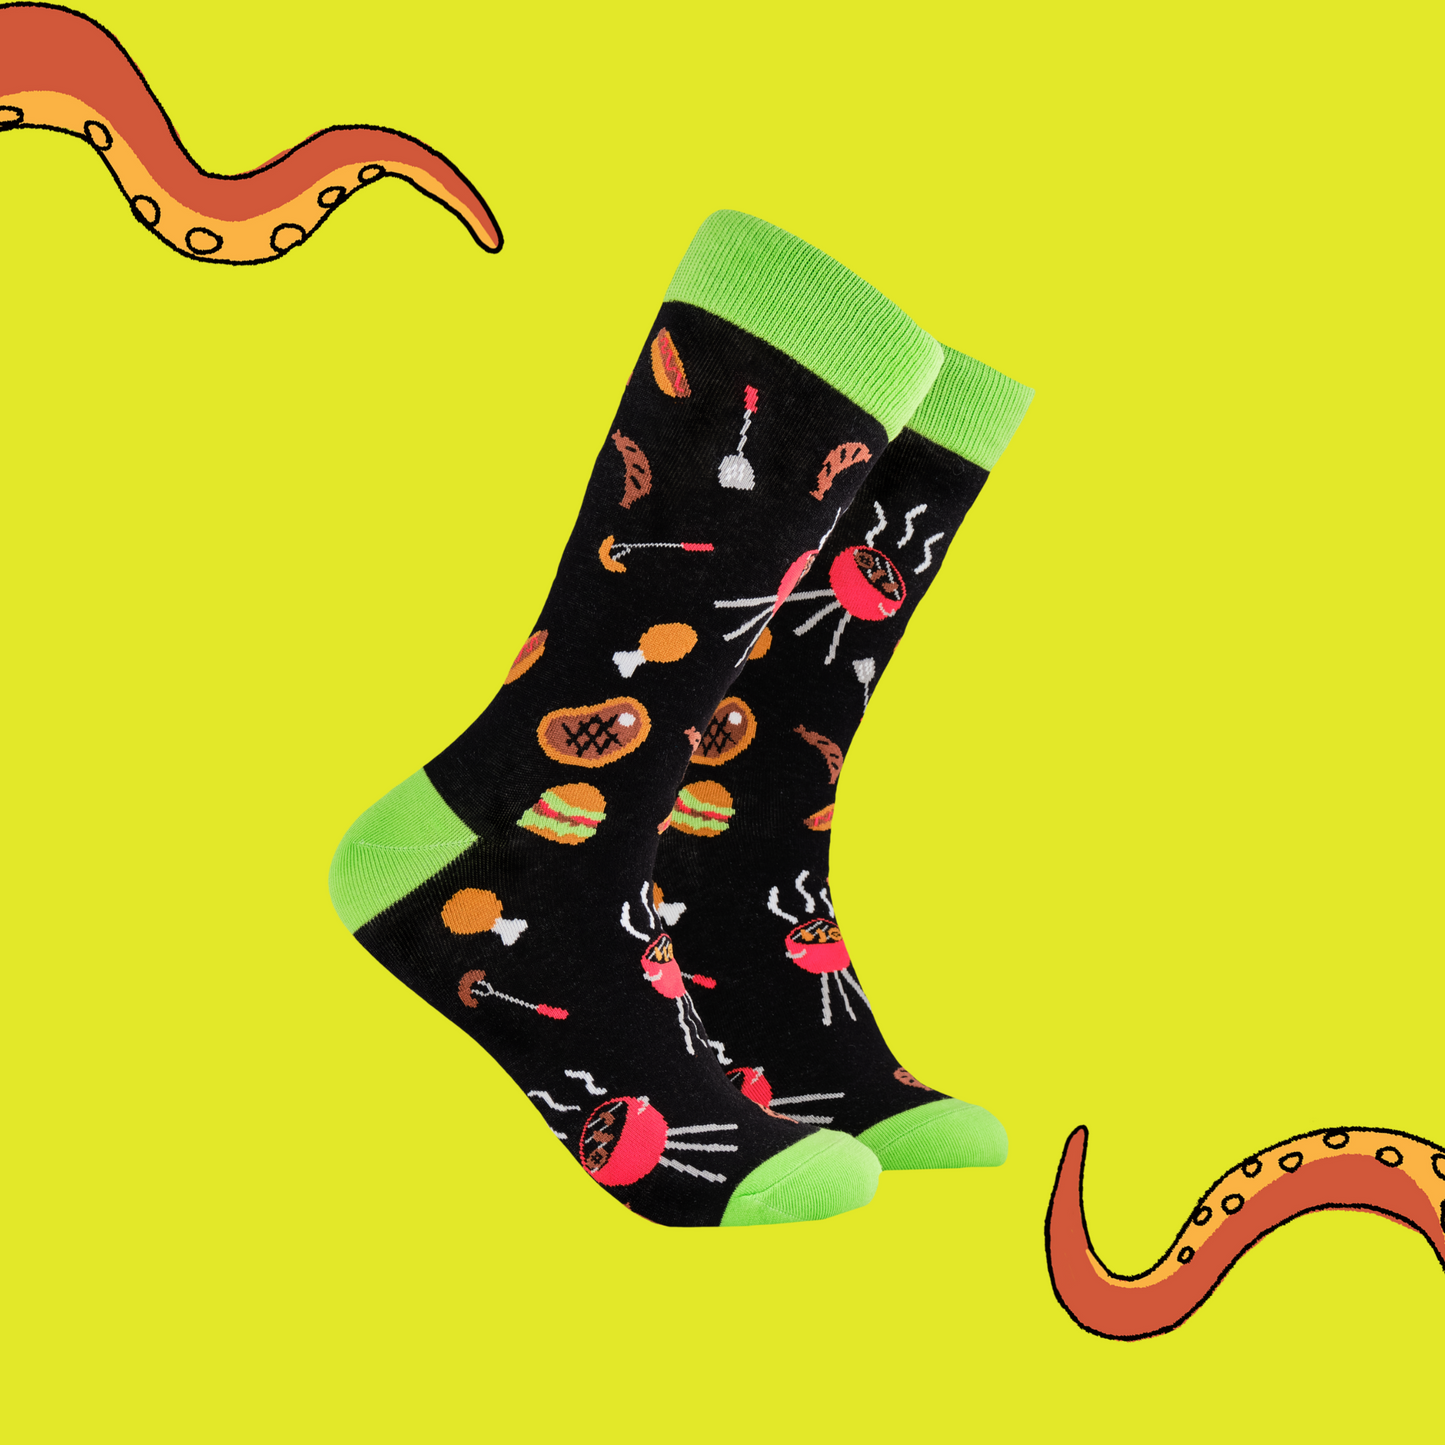 A pair of socks depicting Meat and BBq tools. Black legs, green cuff, heel and toe.